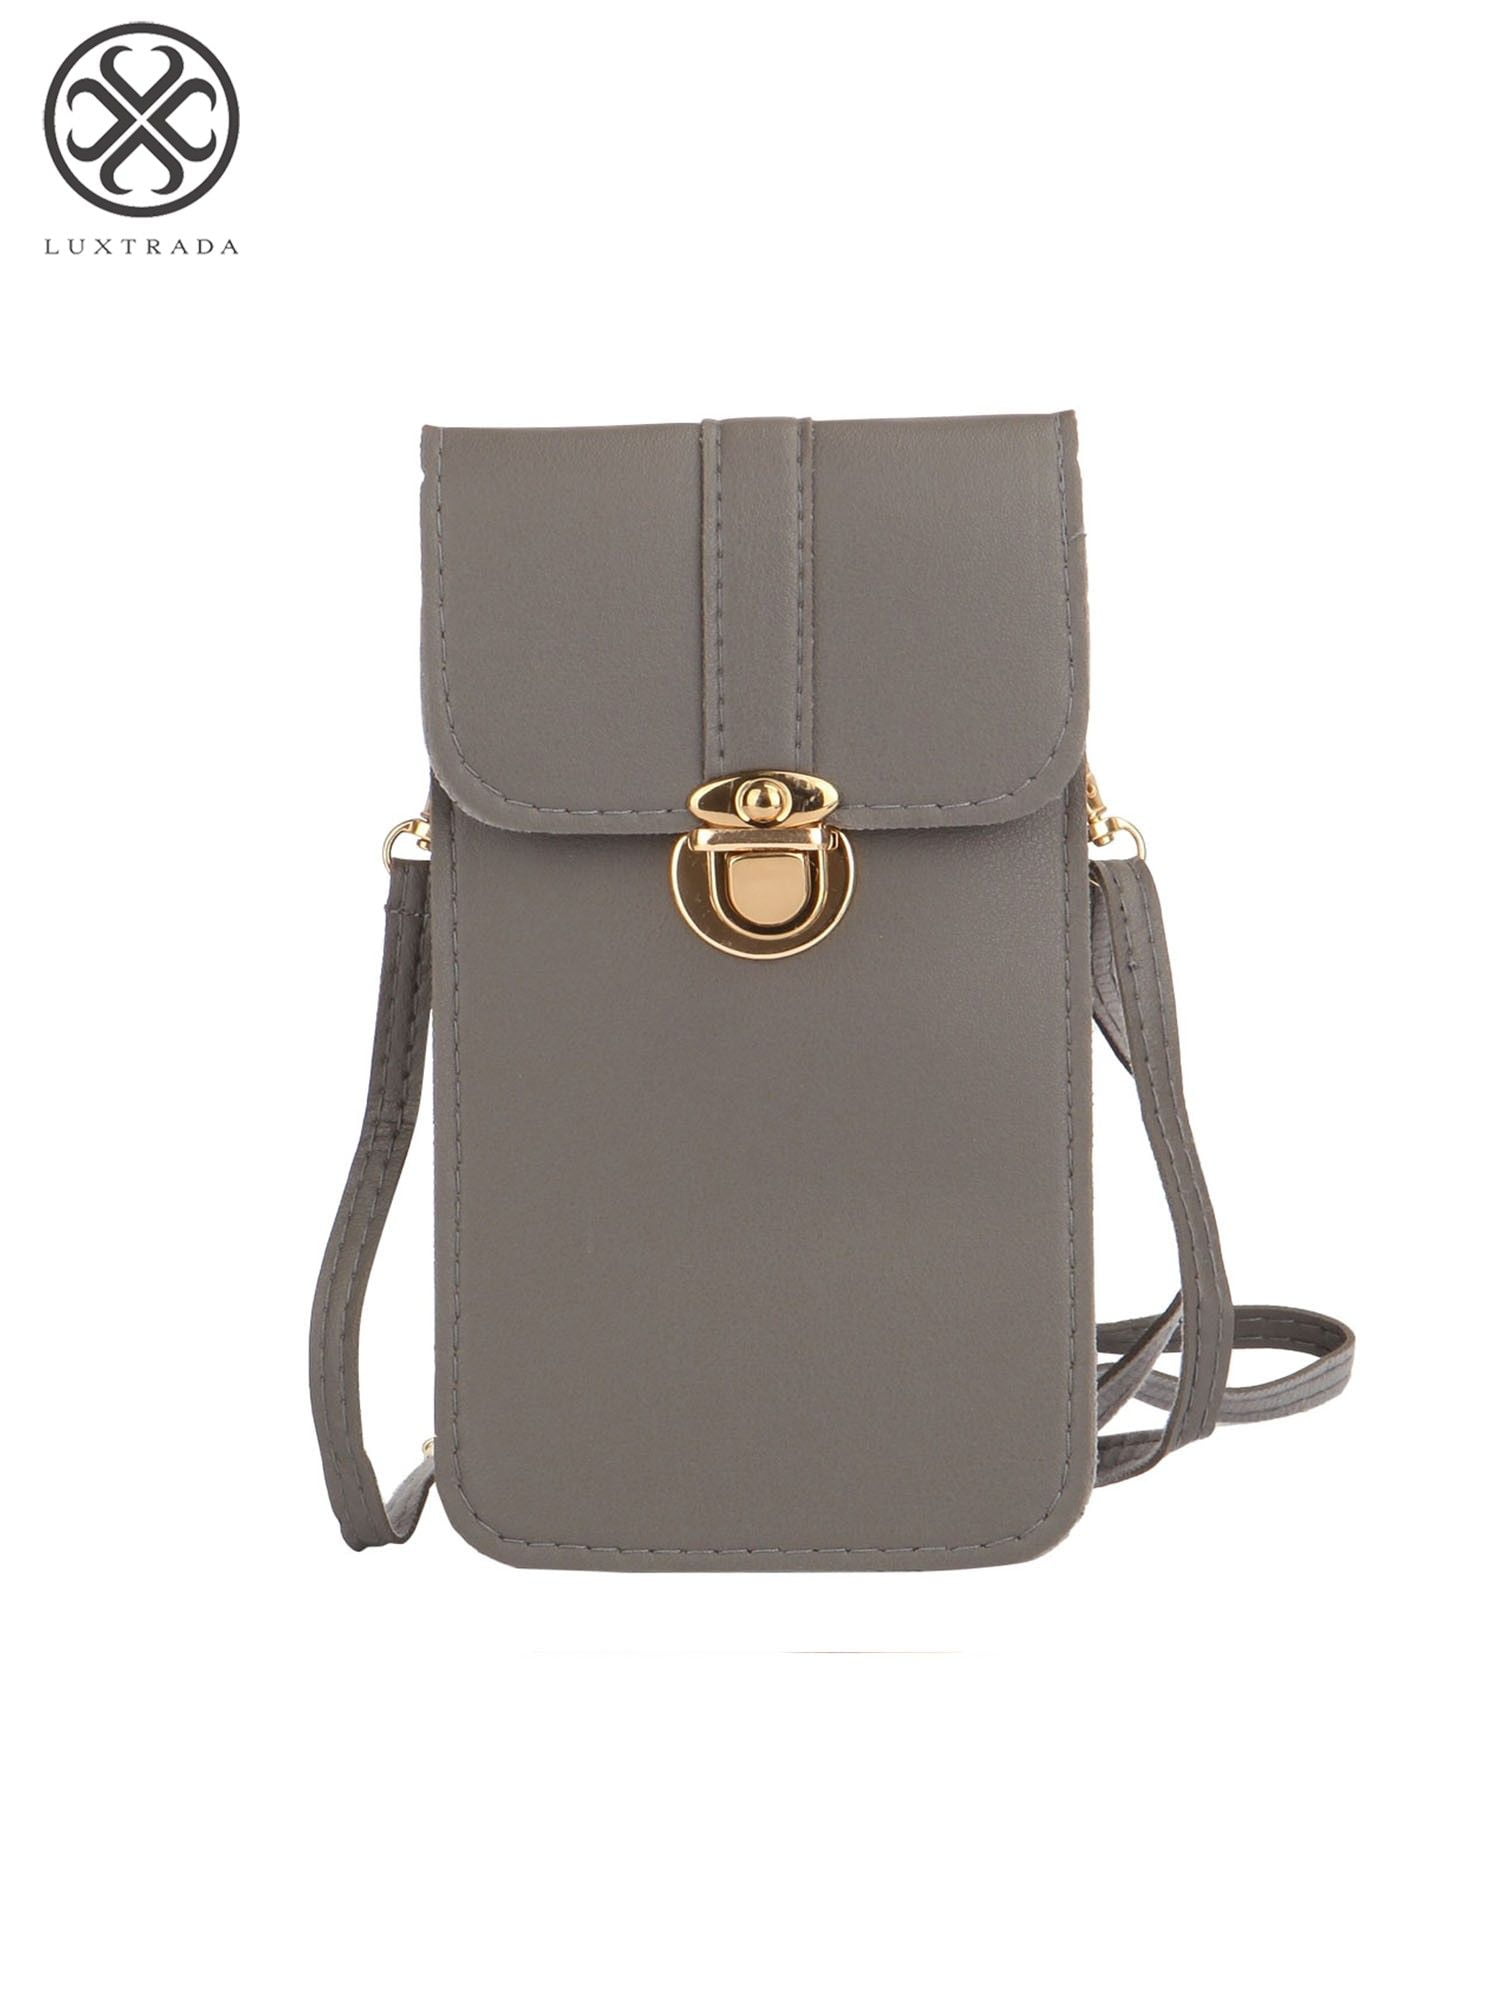 Details about   Girls PU Leather Mobile Phone Bag Case Pouch Cross Body Purse Small Shoulder Bag